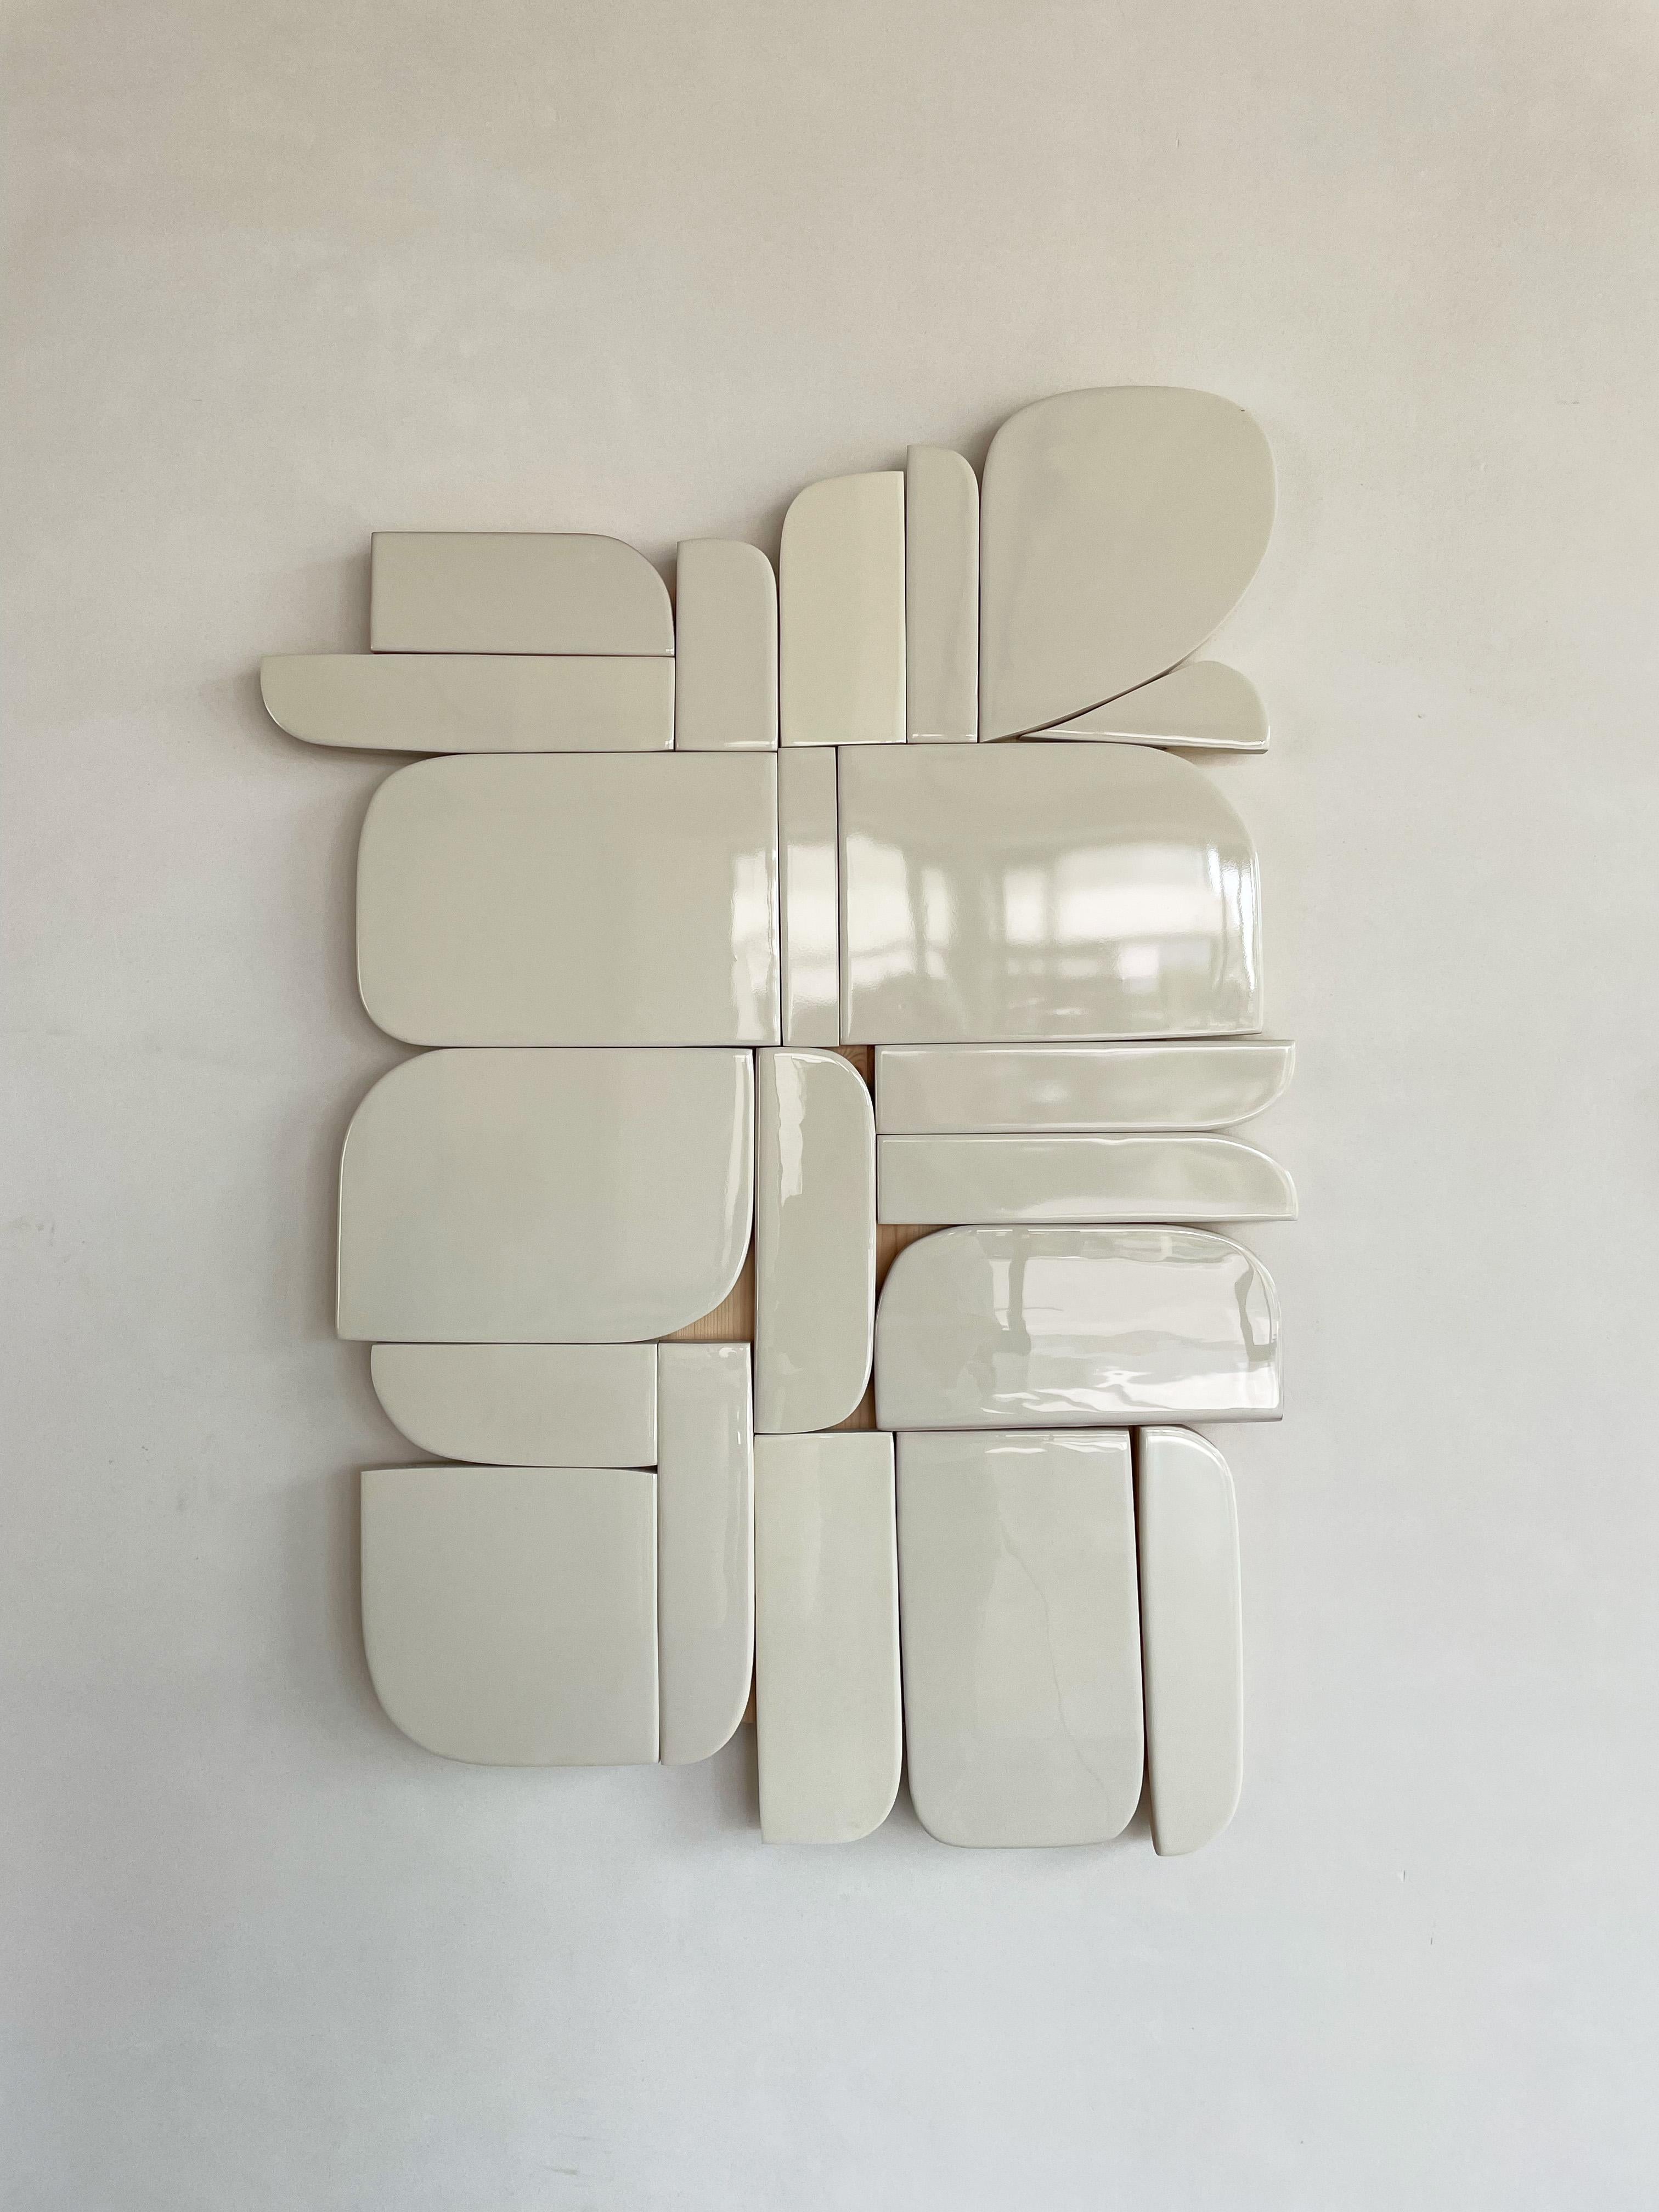 Elements #025 wall sculpture by Eline Baas
Dimensions: D 5 x W 70 x H 100 cm
Materials: Wax, Wood

STUDIO ELINE BAAS is an Amsterdam-based Interior Design studio. 

Whether it is a private home, office, restaurant, hotel or the aesthetic styling of